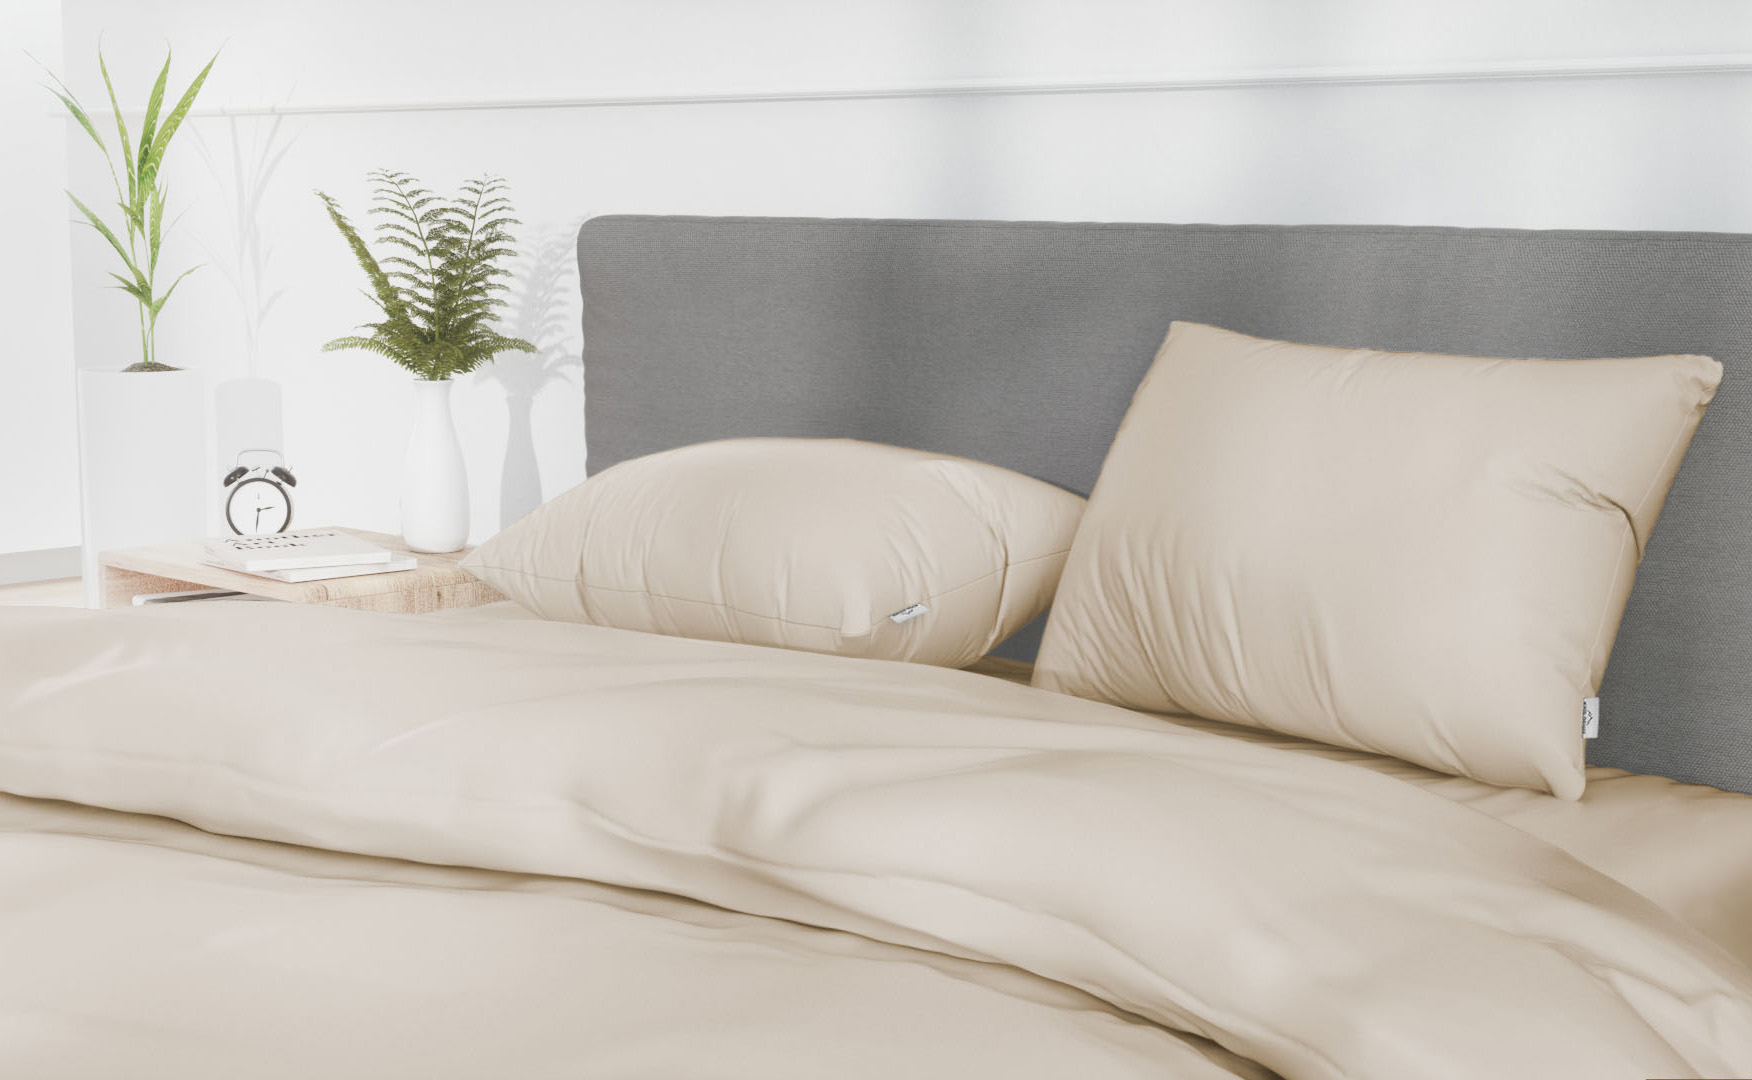 Comfortable and colorful, the perfect finishing touch to your bedroom